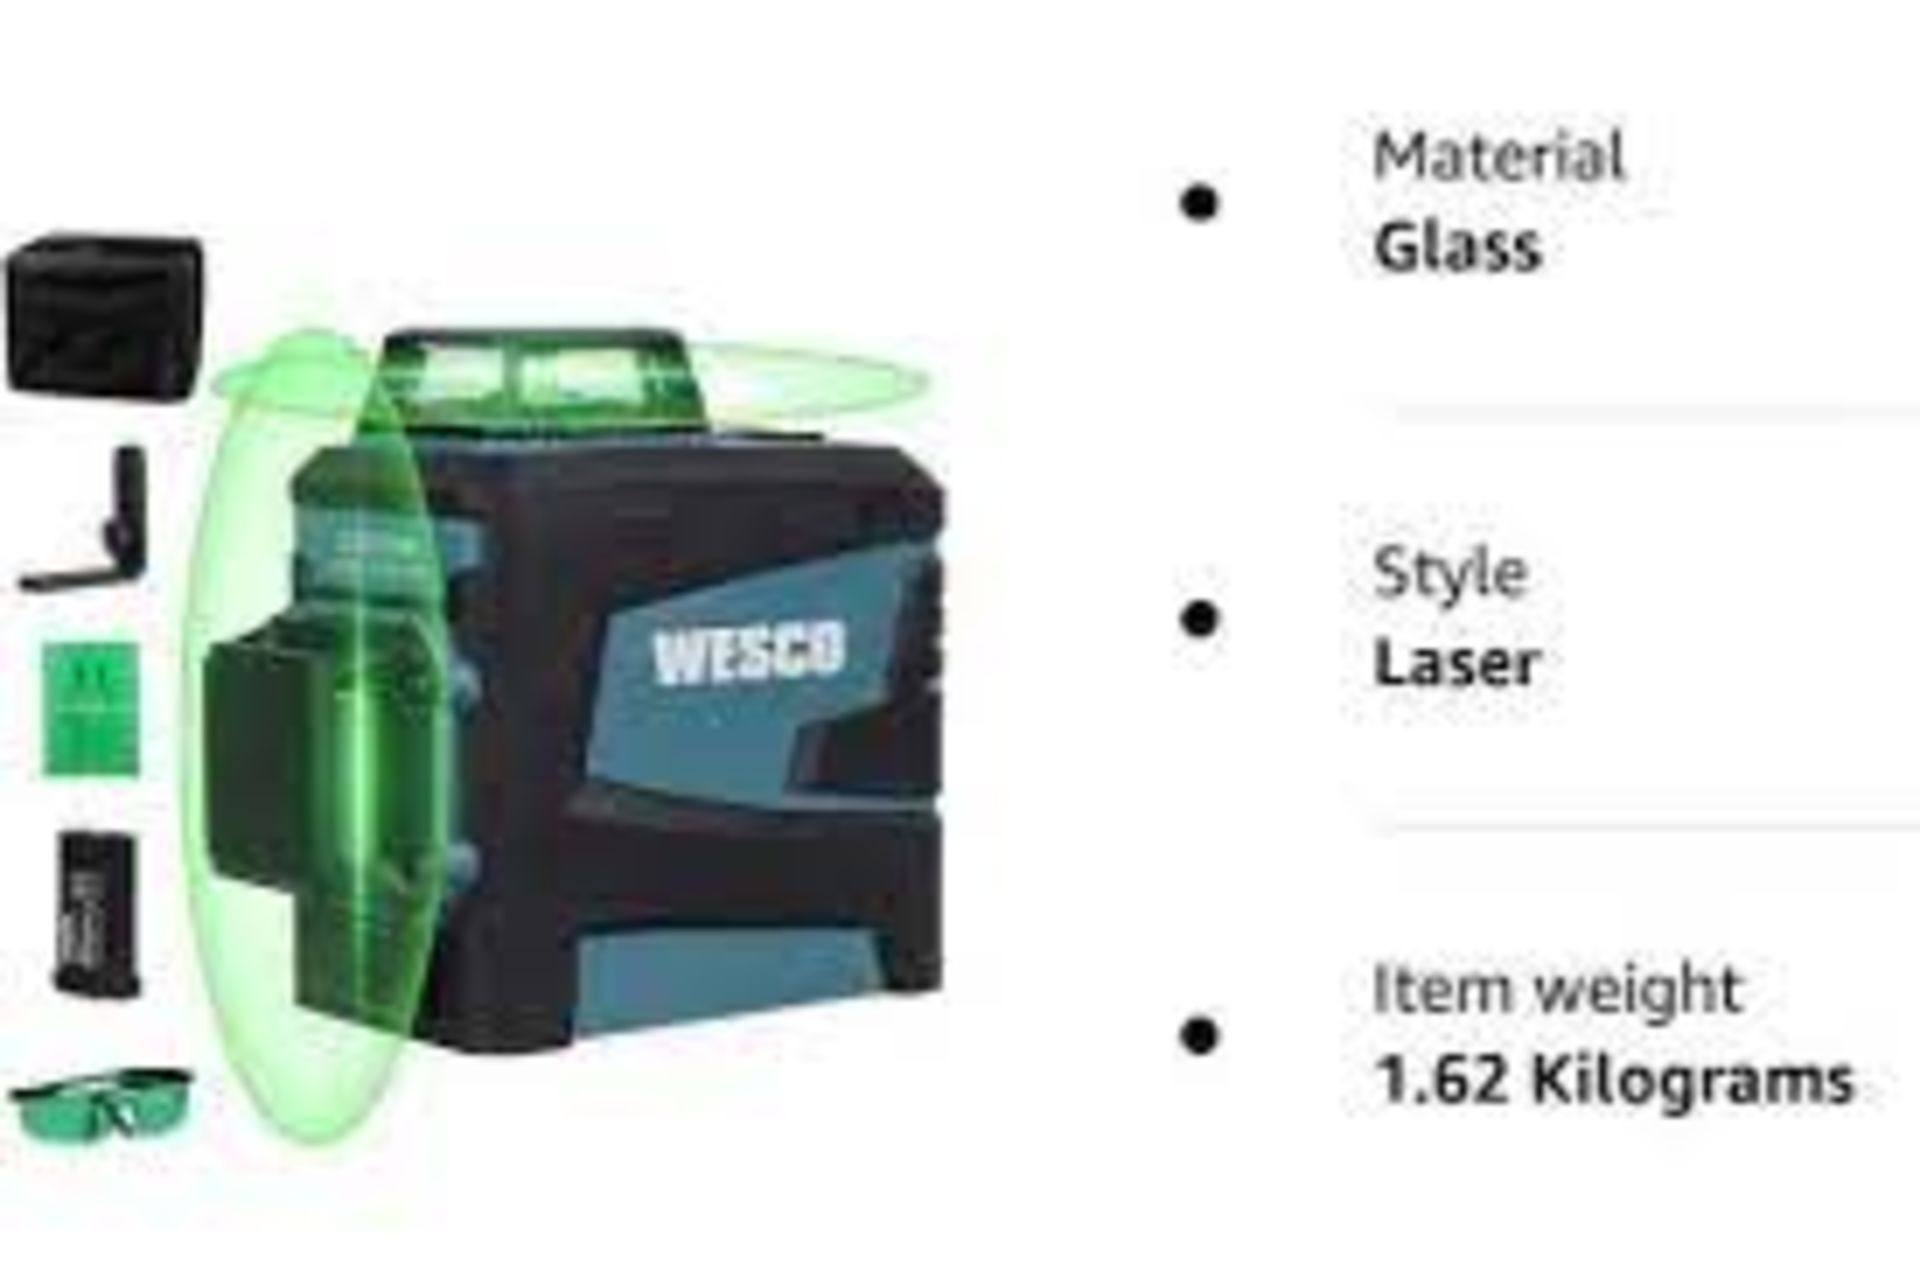 TRADE LOT 8 x New & Boxed WESCO 3D Cross Line Laser Level, 65ft Green Laser Tool, Manual and